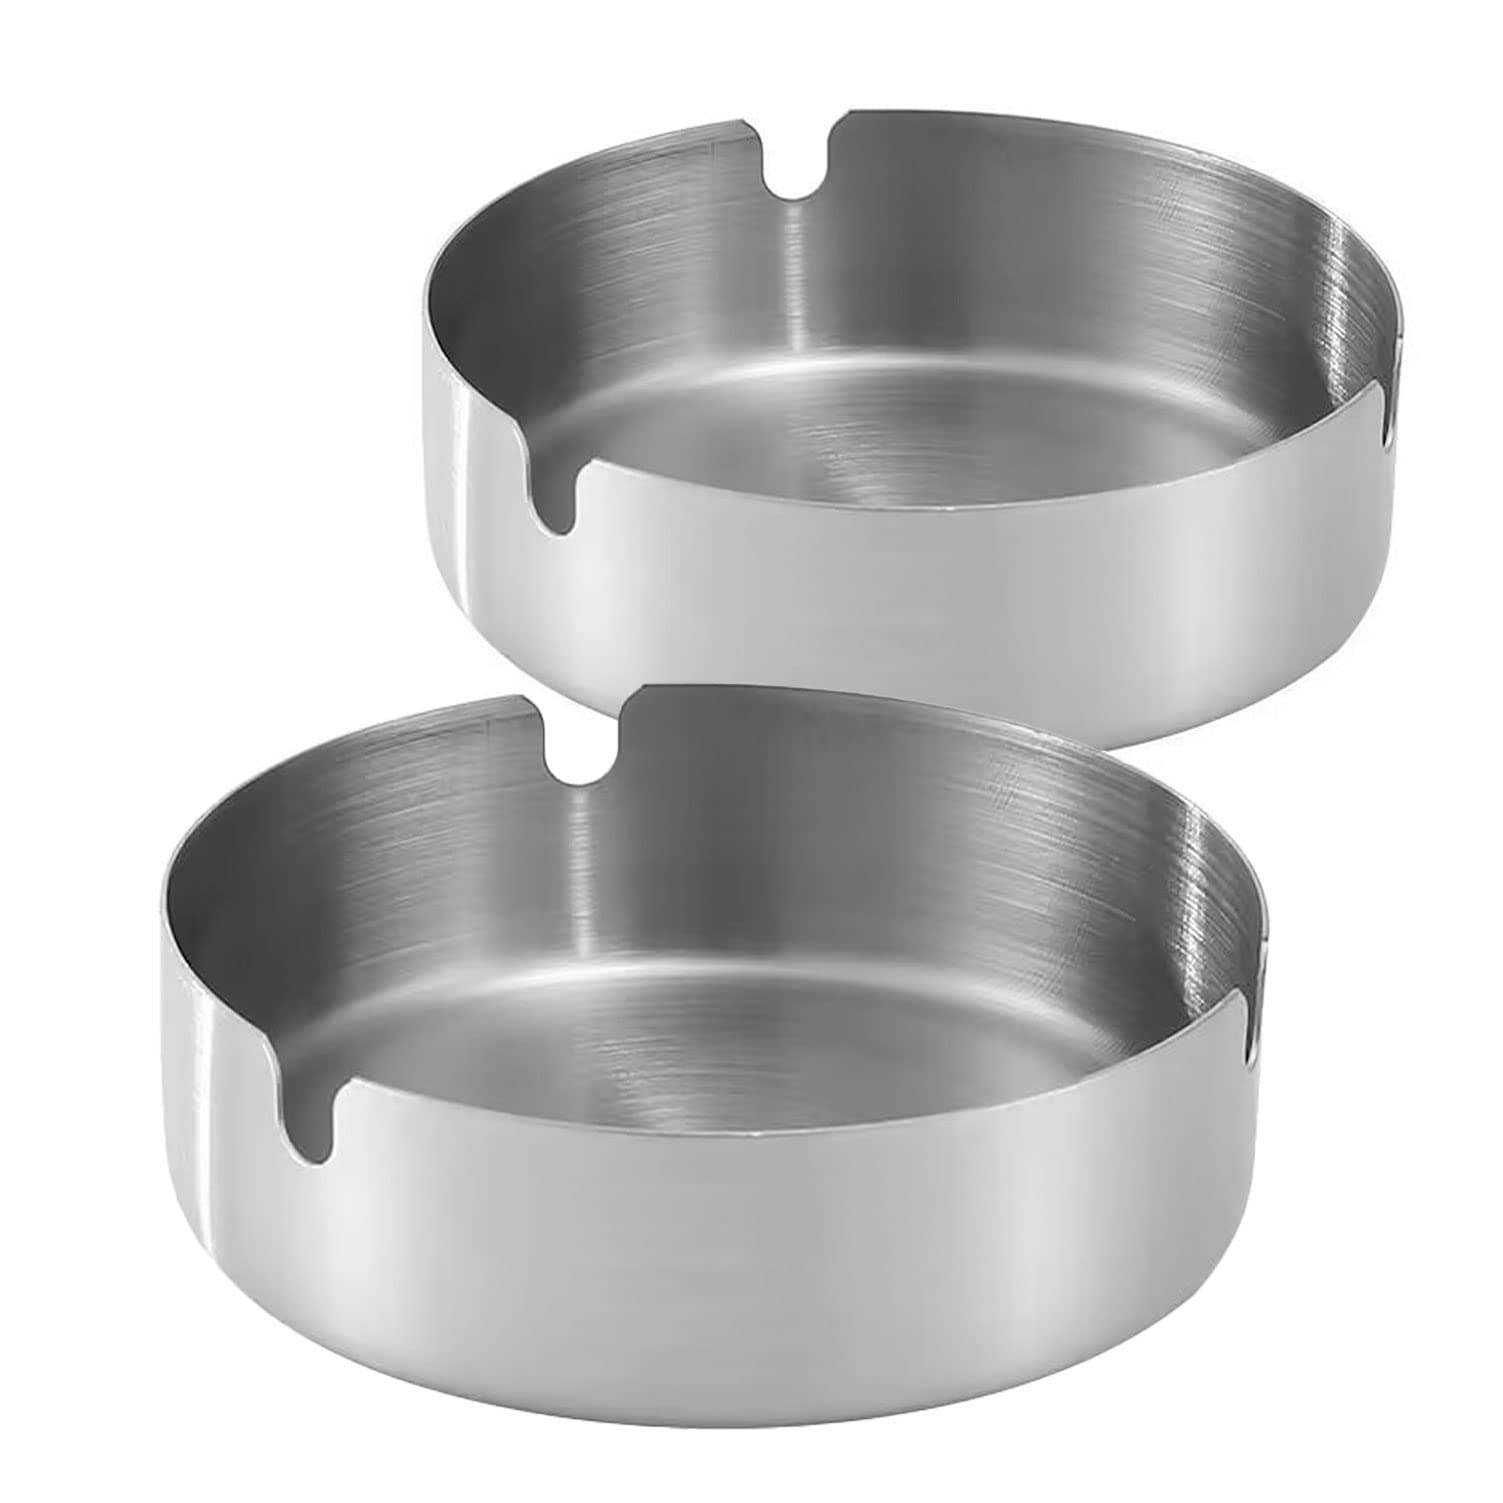 Ashtray Stainless Steel Cigarette Ashtray Ash Tray for Cigarettes 2 Pack (Silver, 3.15in)